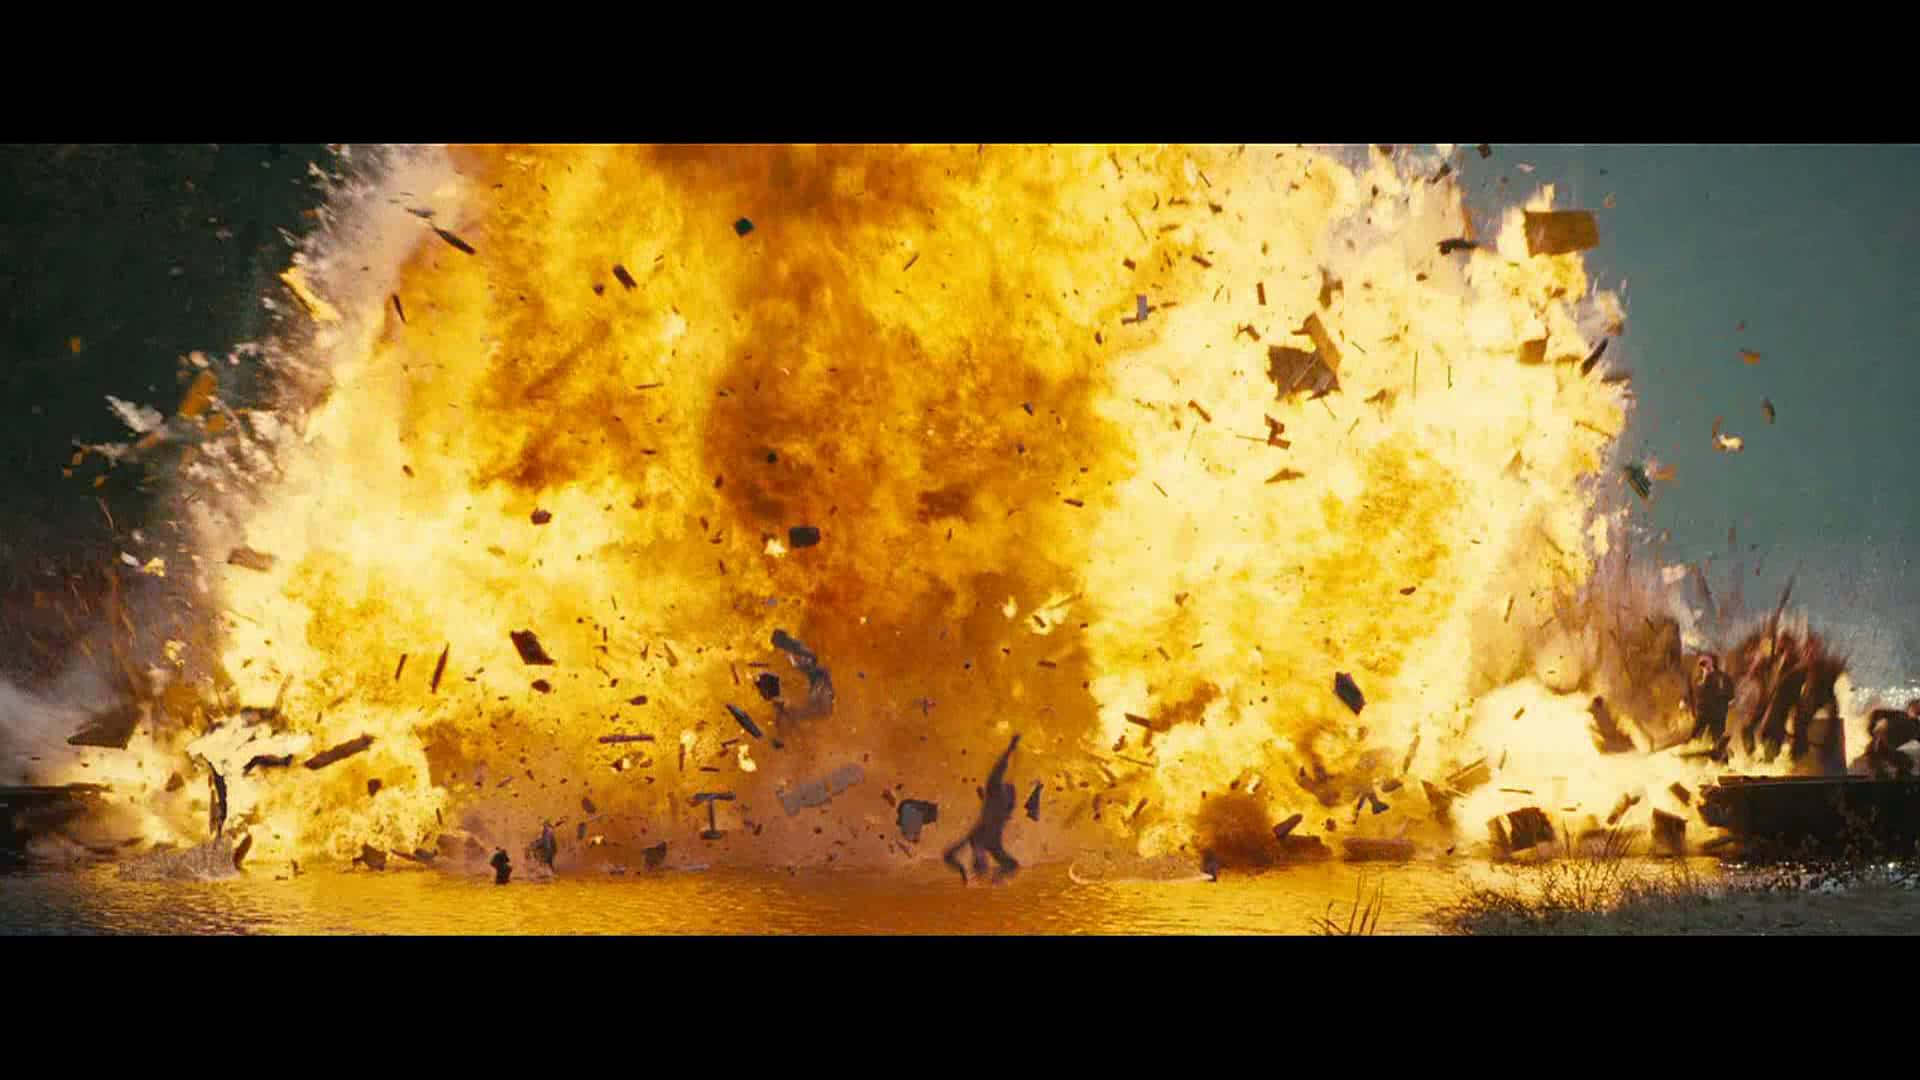 Huge Action Movie Explosion Background